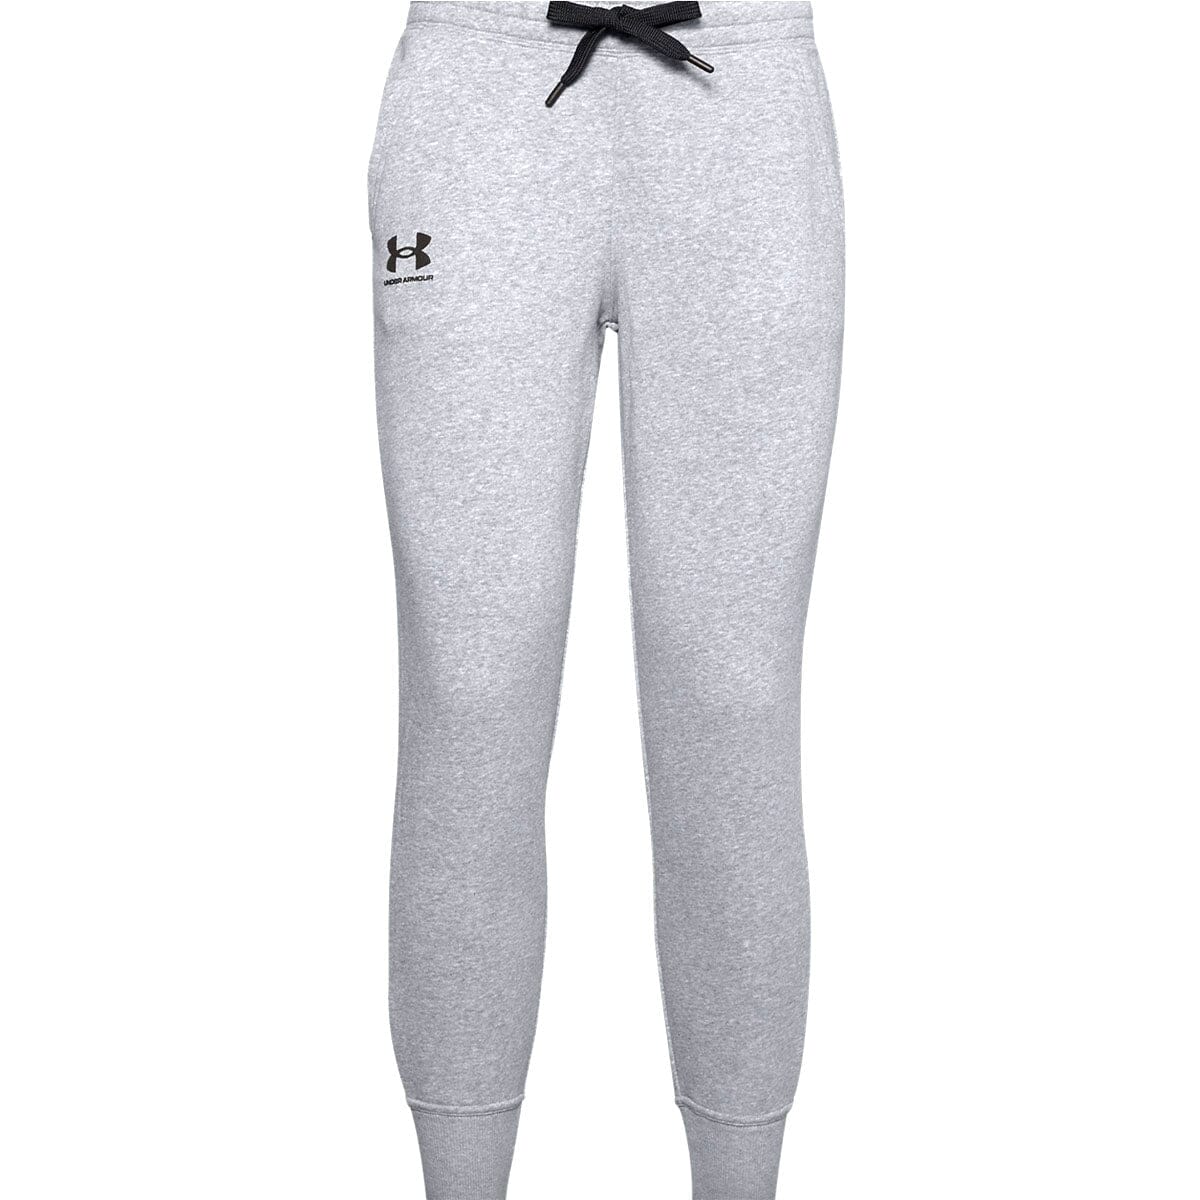 Under Armour Women's Rival Fleece Joggers for just $17 (Reg. $45